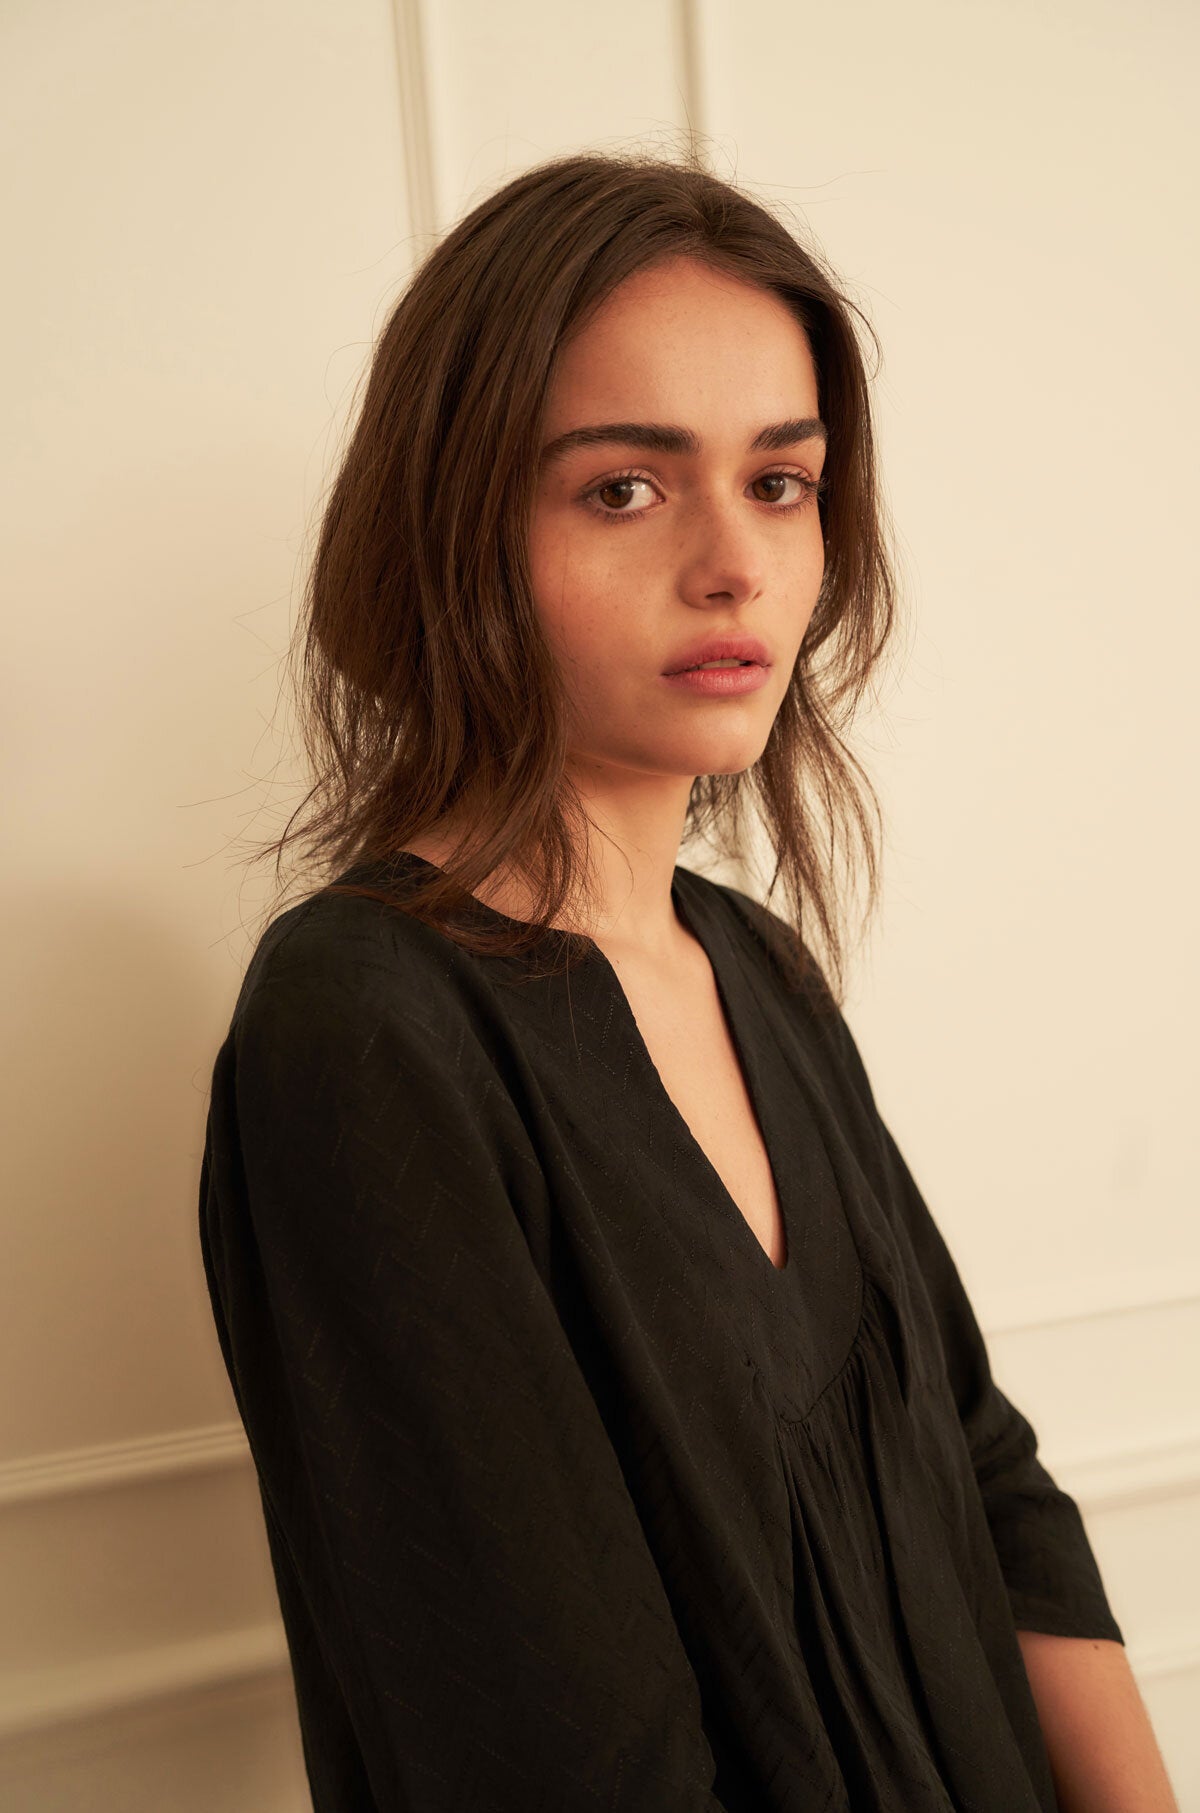 Girl wearing a black viscose top with 3/4 sleeves